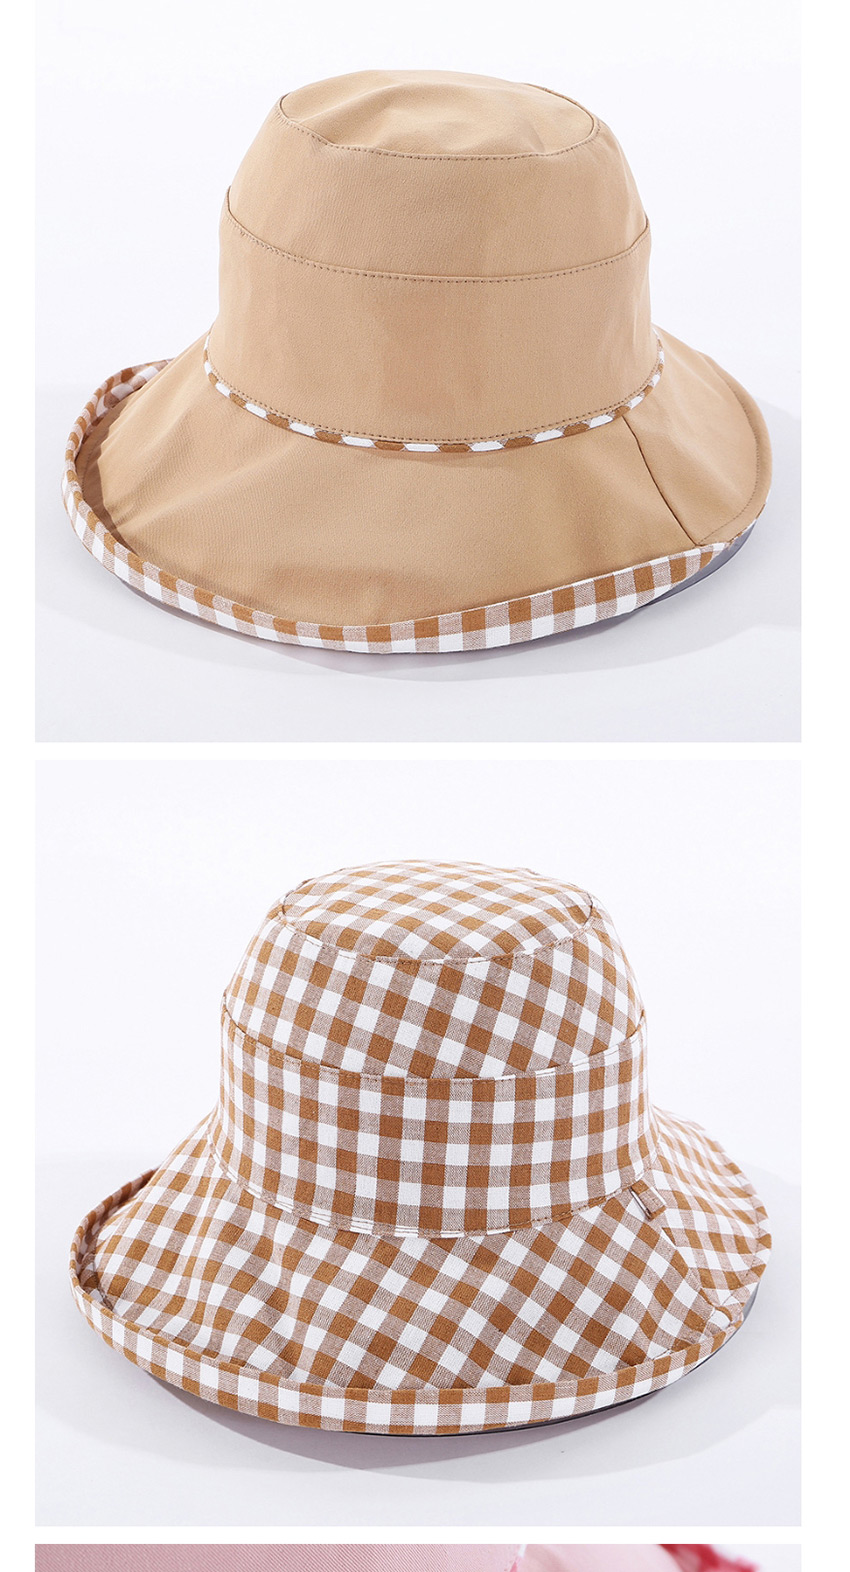 Fashion Black Checked Double-sided Fisherman Hat,Sun Hats